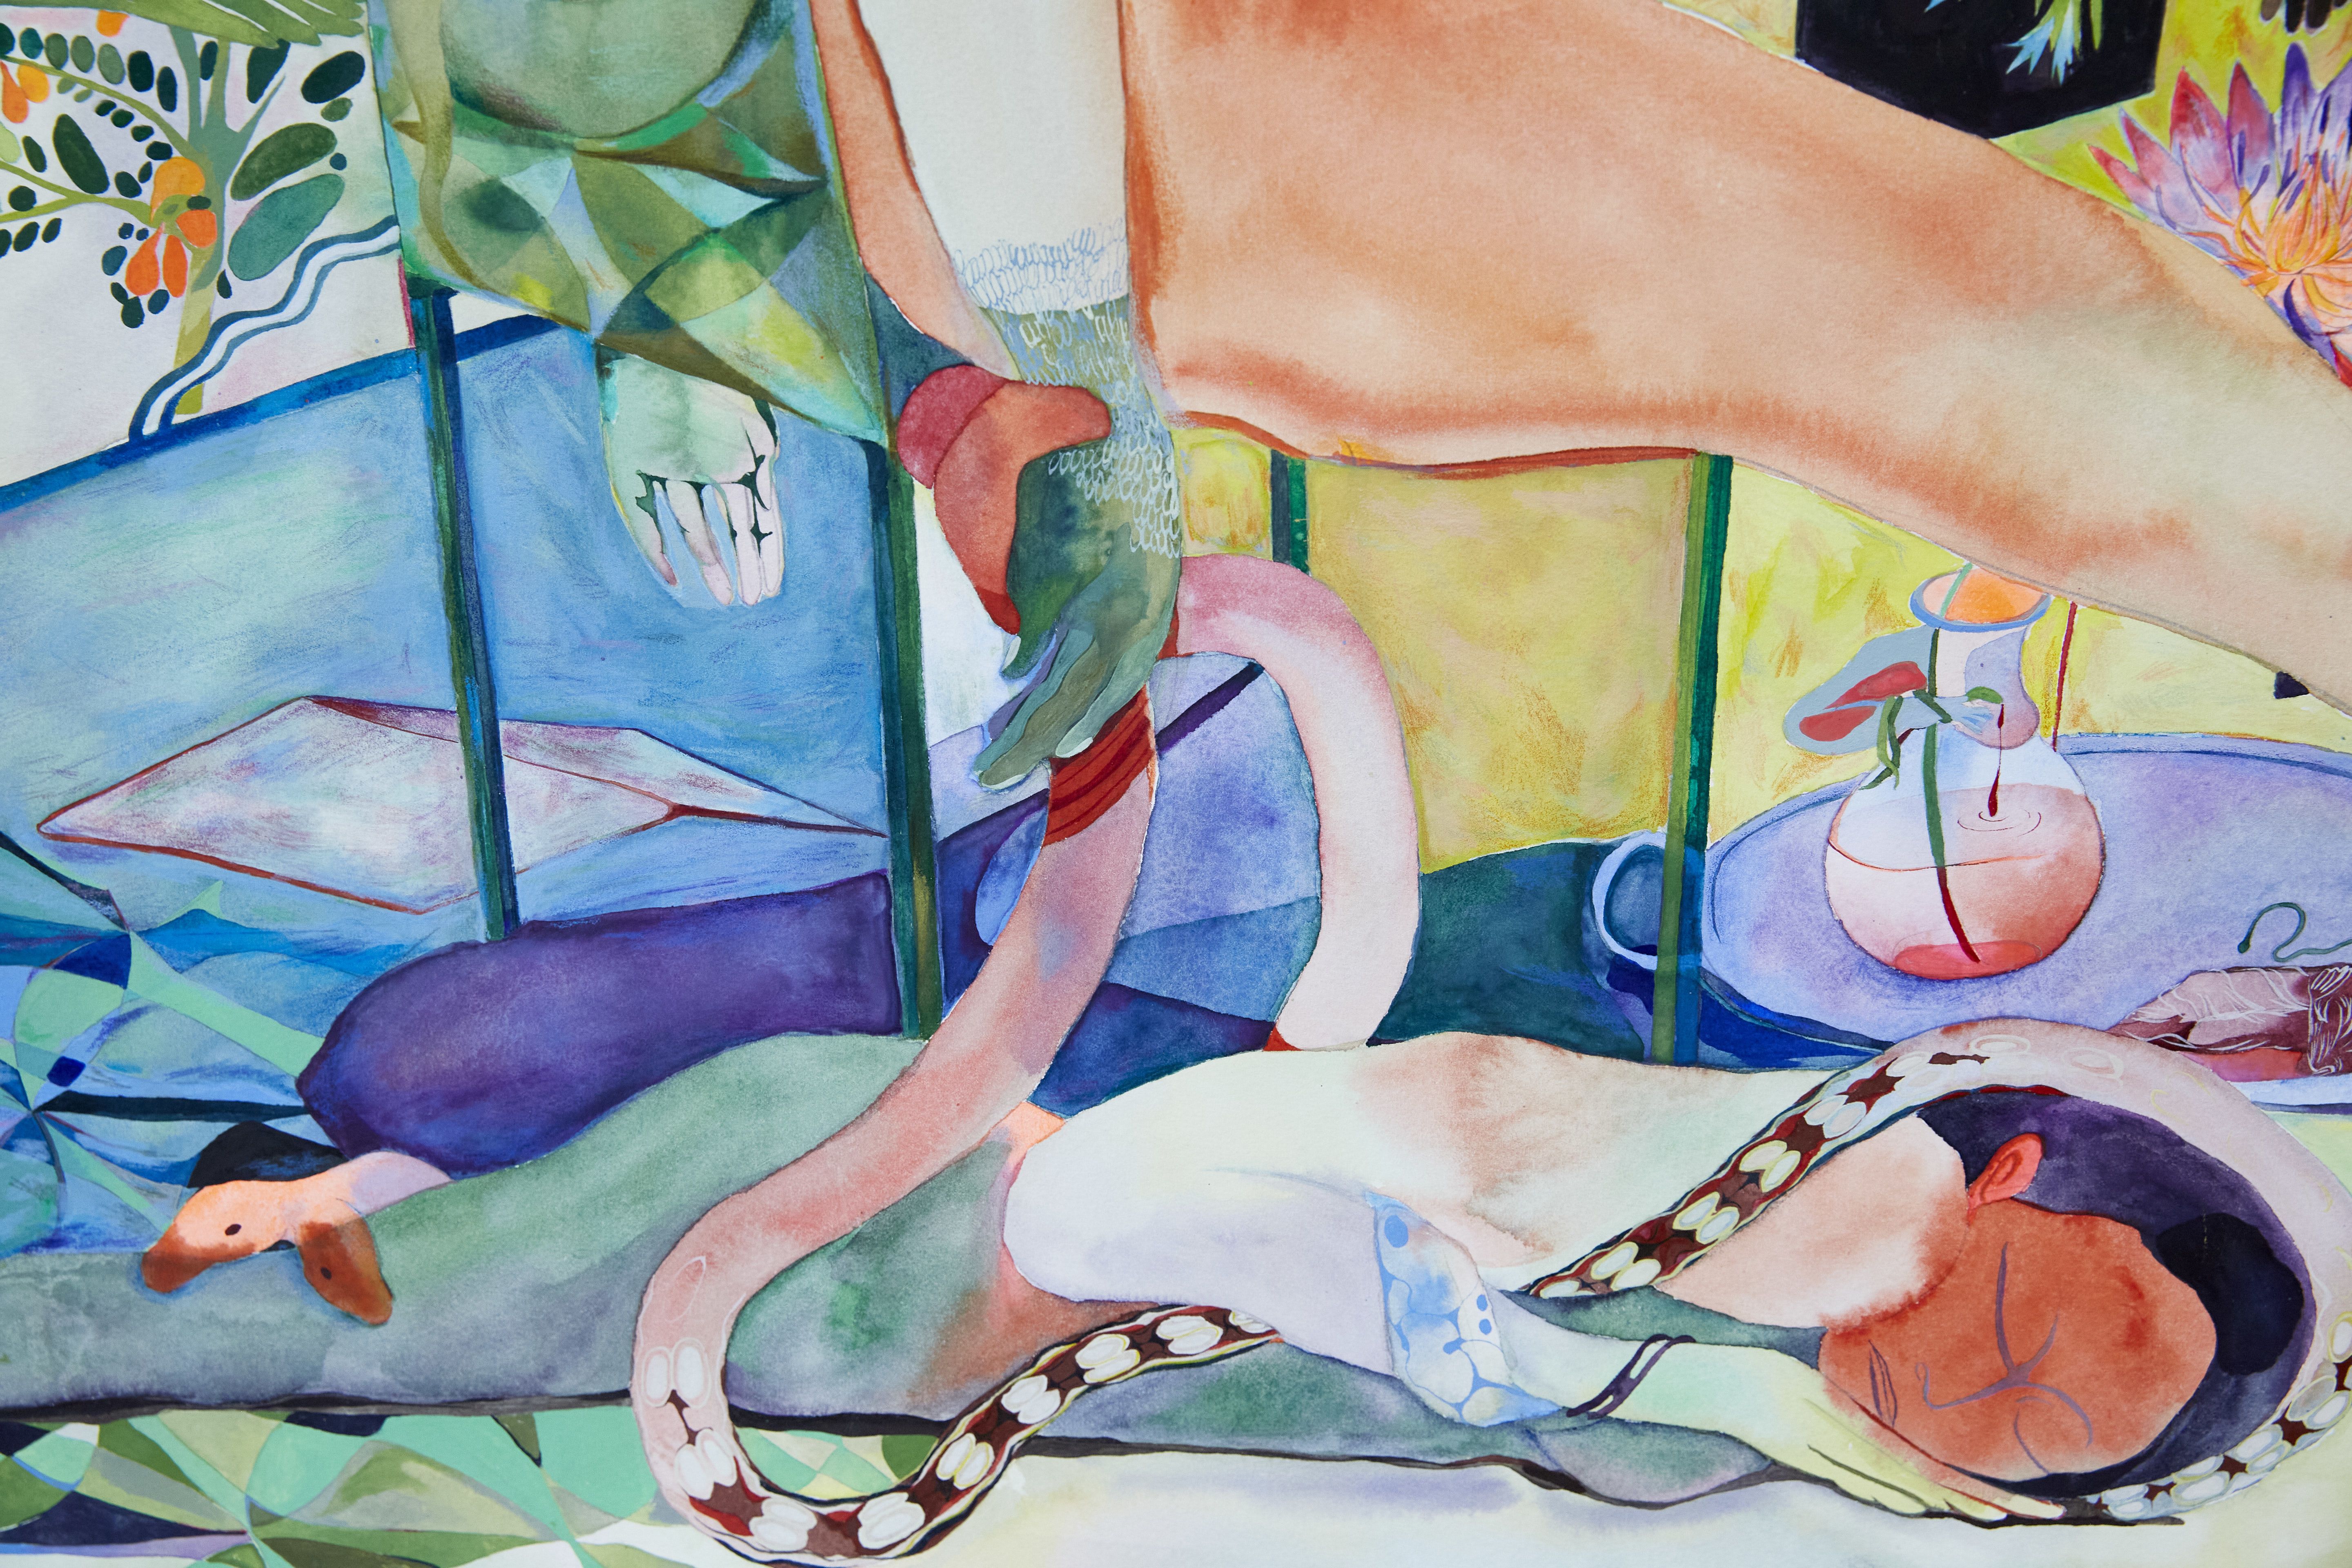 Surreal student artwork depicting a sleeping figure wrapped in a snake, painted with watercolours